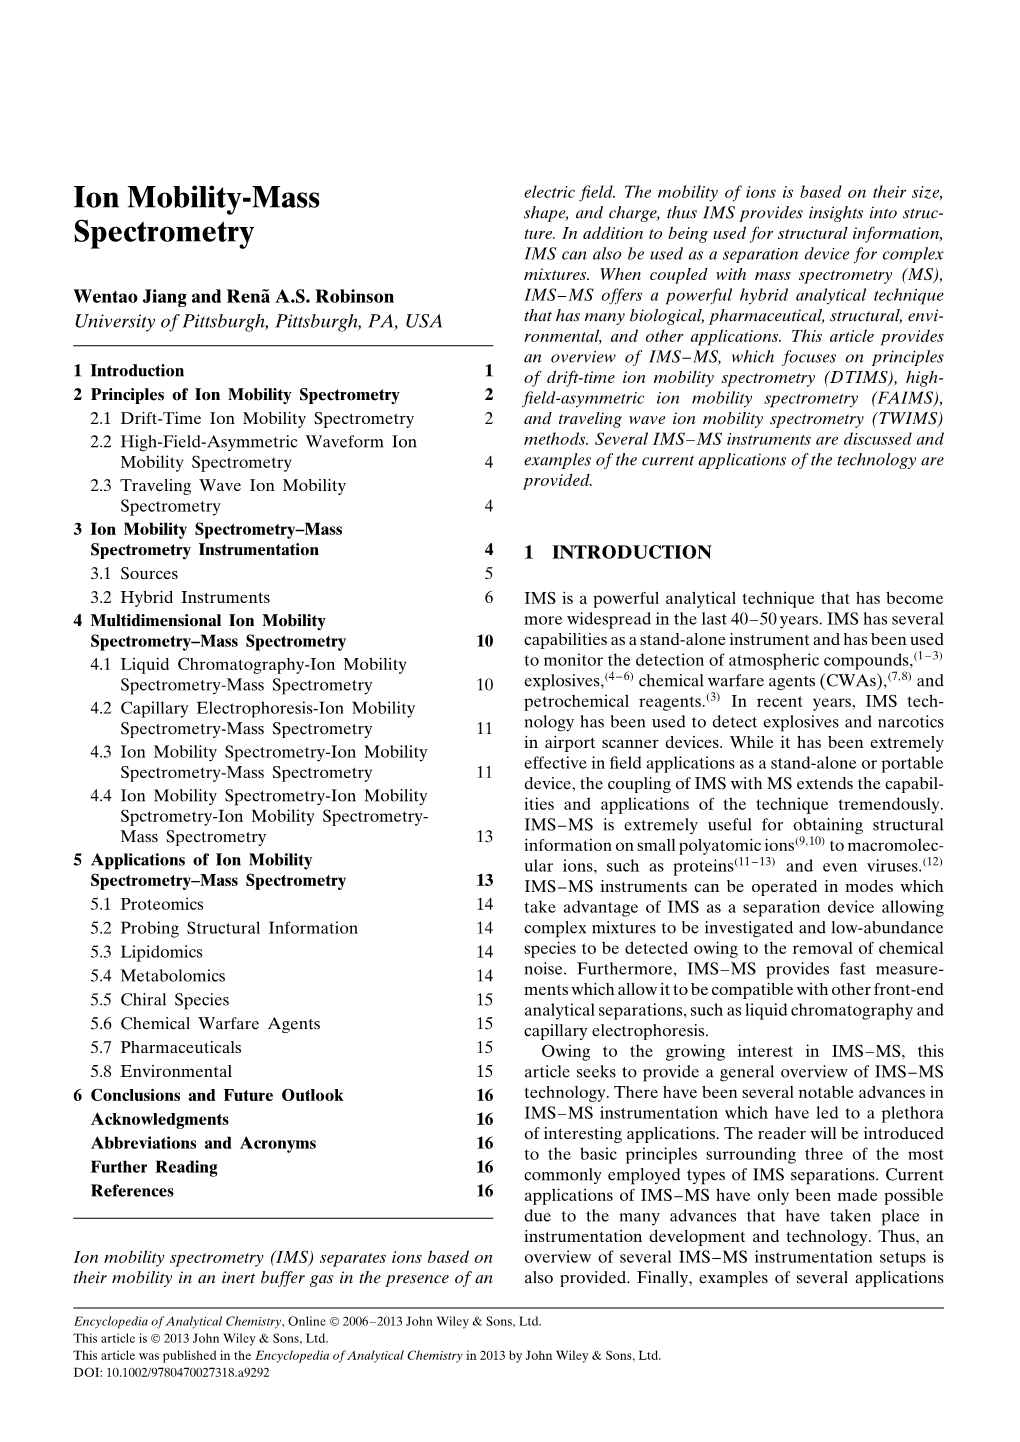 "Ion Mobility-Mass Spectrometry" In